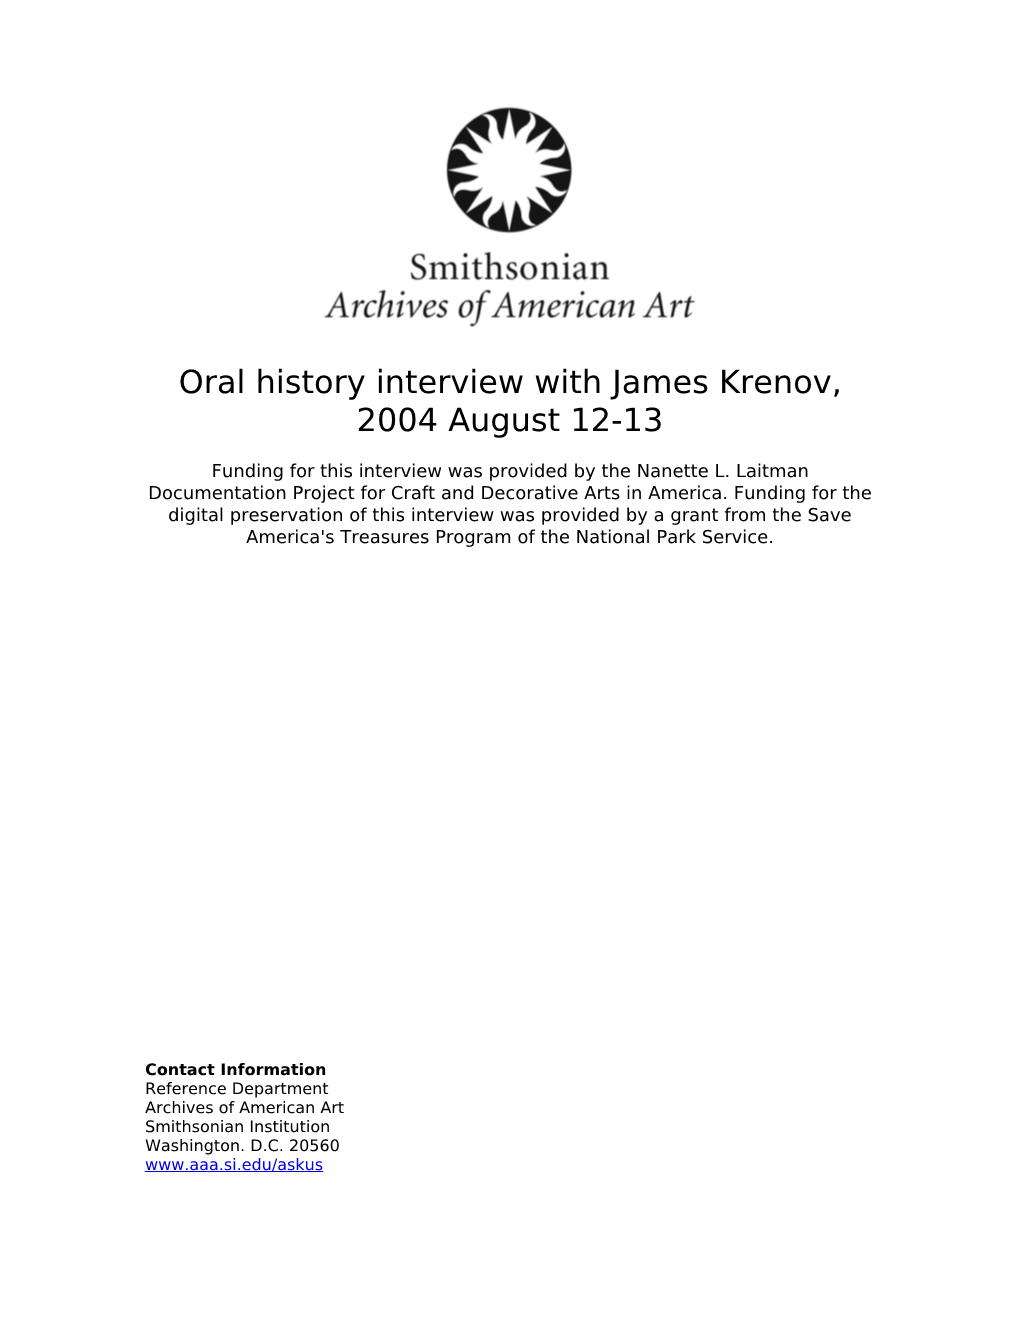 Oral History Interview with James Krenov, 2004 August 12-13